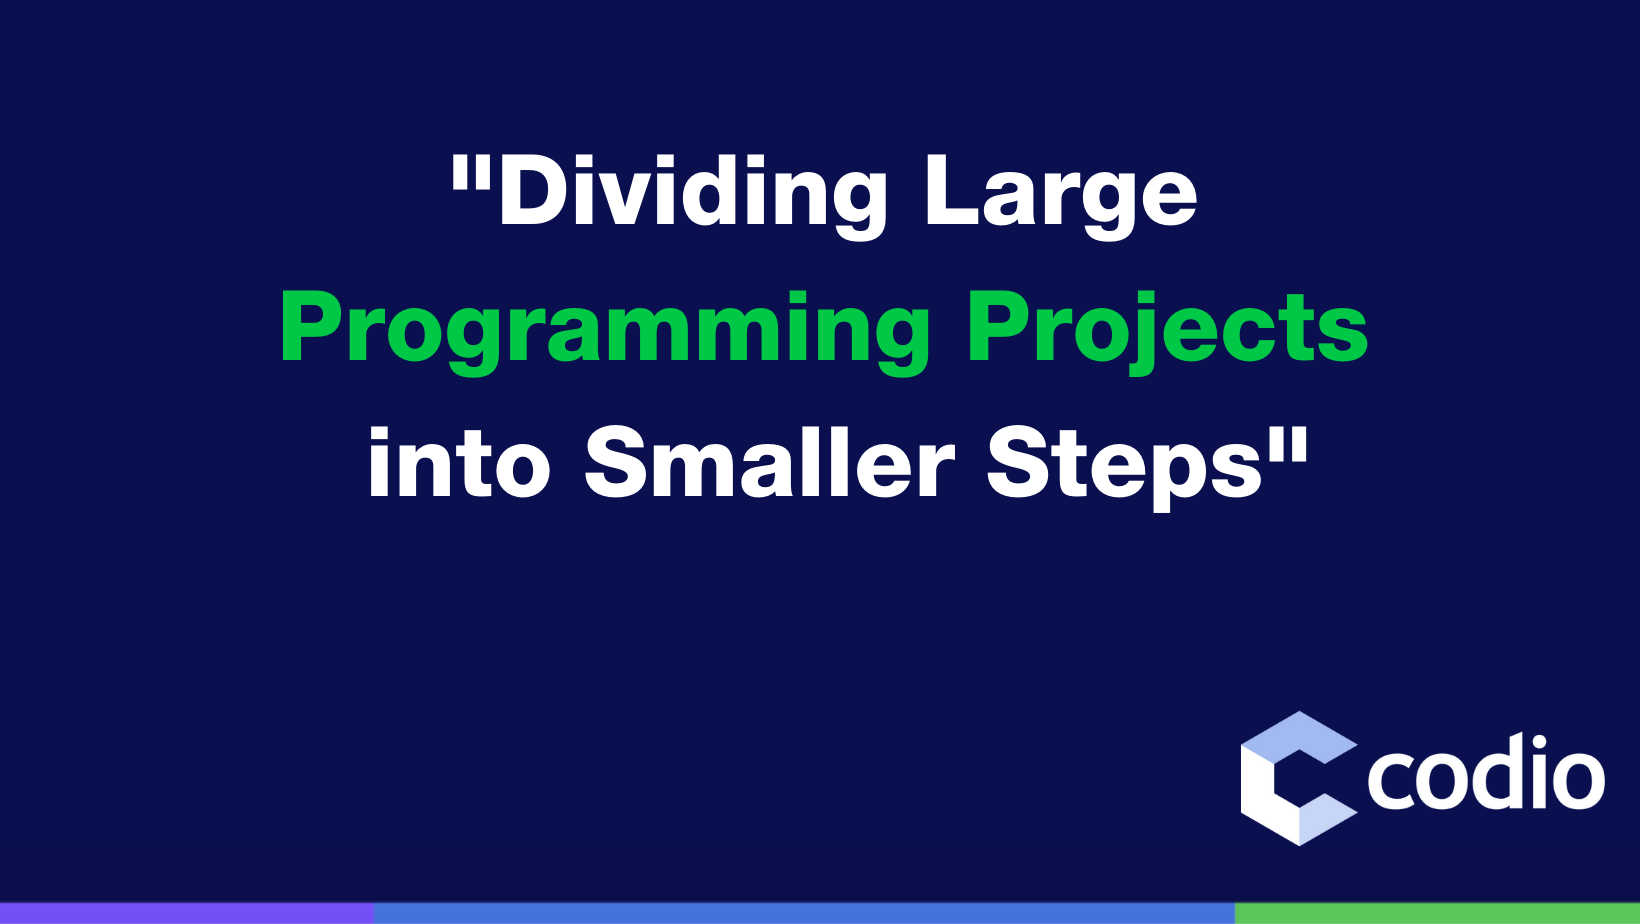 Dividing Large Programming Projects into Smaller Steps